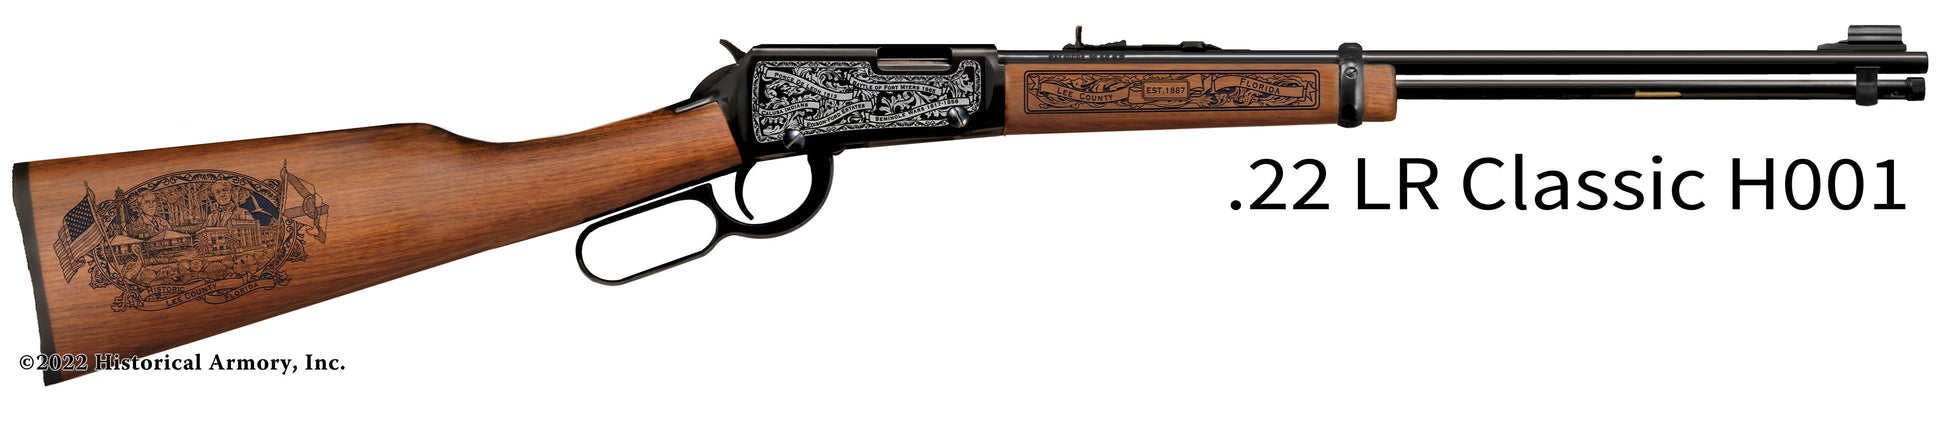 Lee County Florida Engraved Henry H001 Rifle